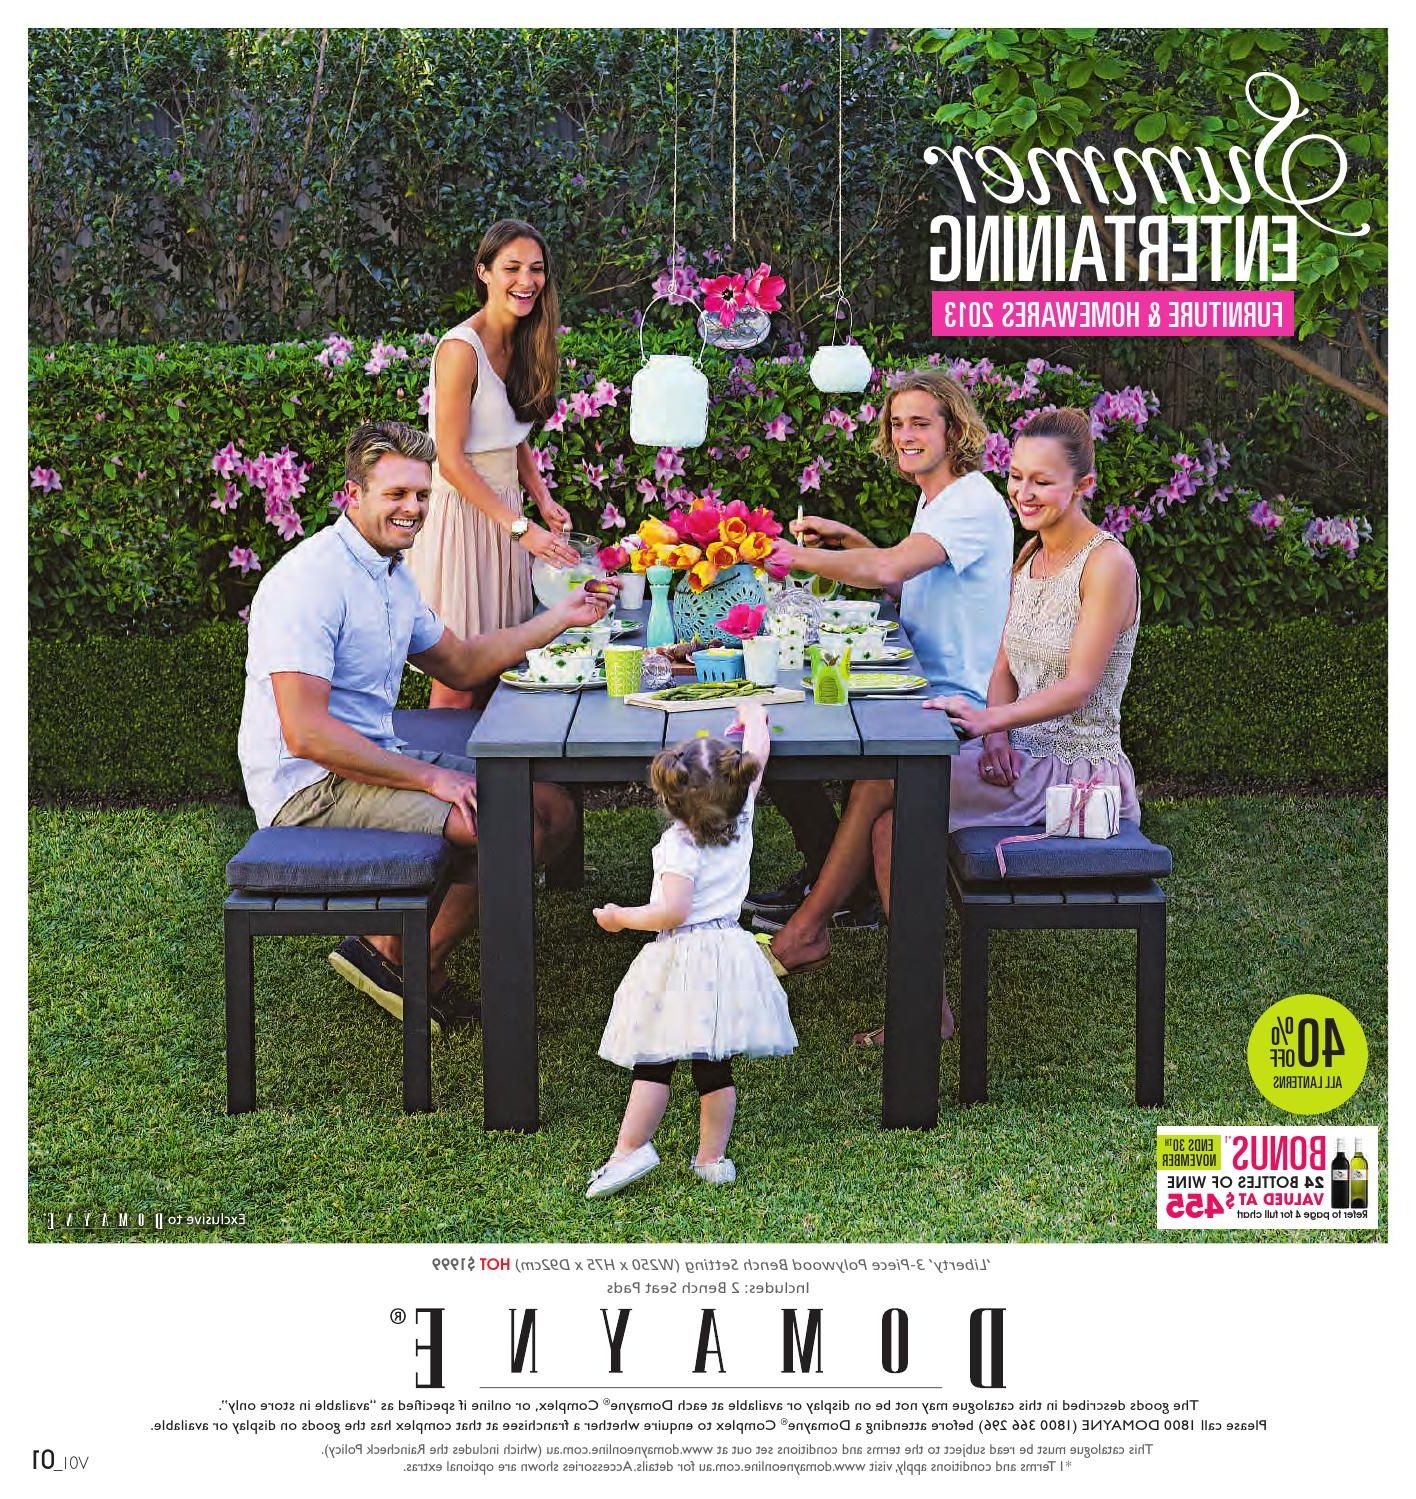 Current Wallflower 3 Piece Dining Sets Intended For Summer Entertaining Cataloguedomayne – Issuu (View 10 of 25)